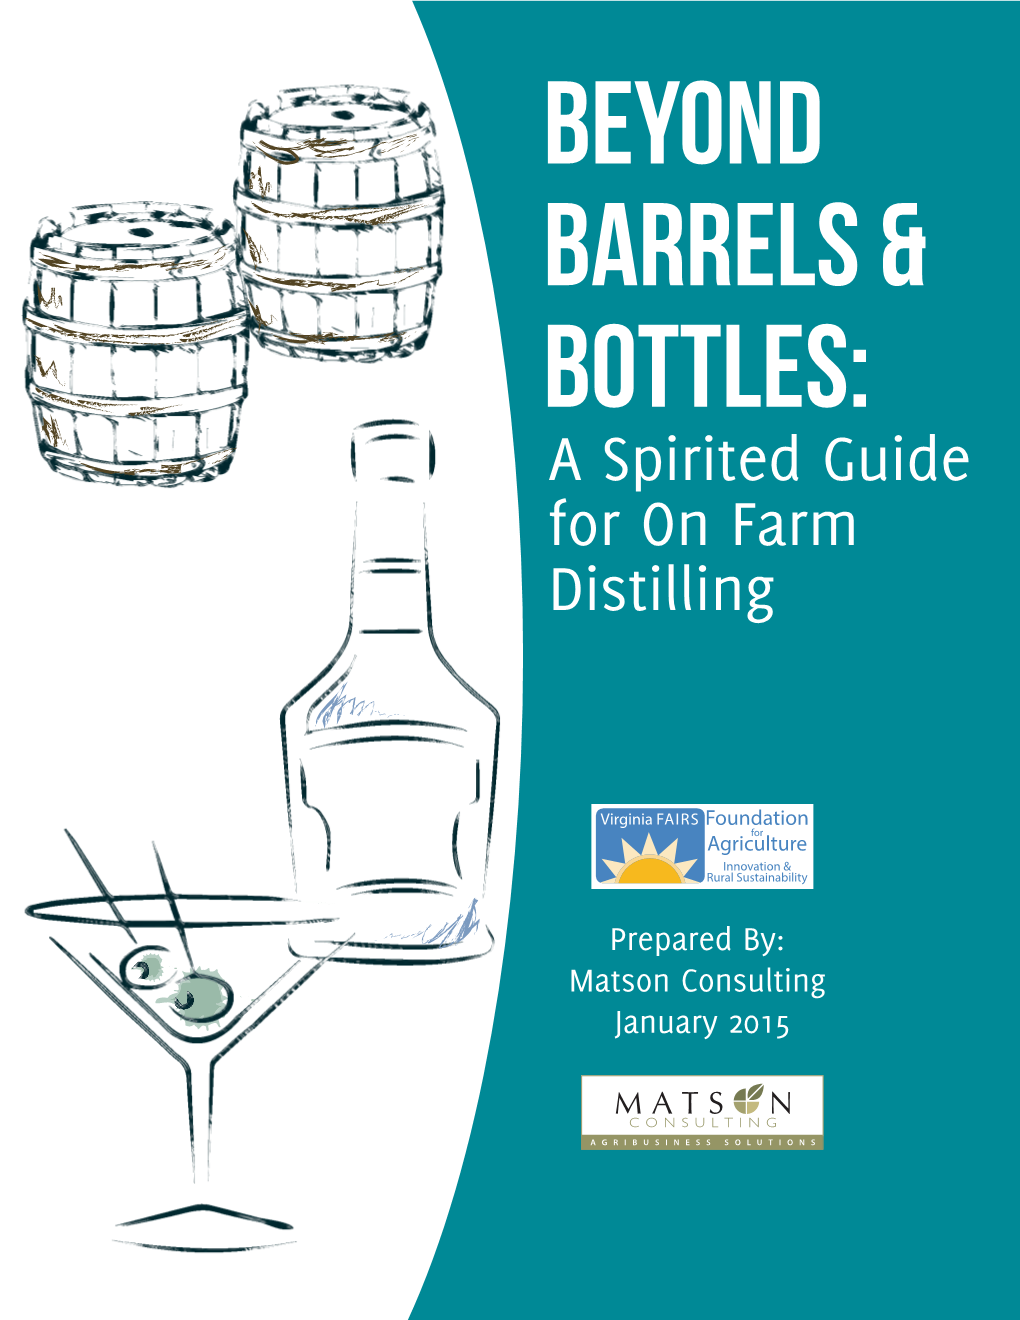 A Spirited Guide for on Farm Distilling